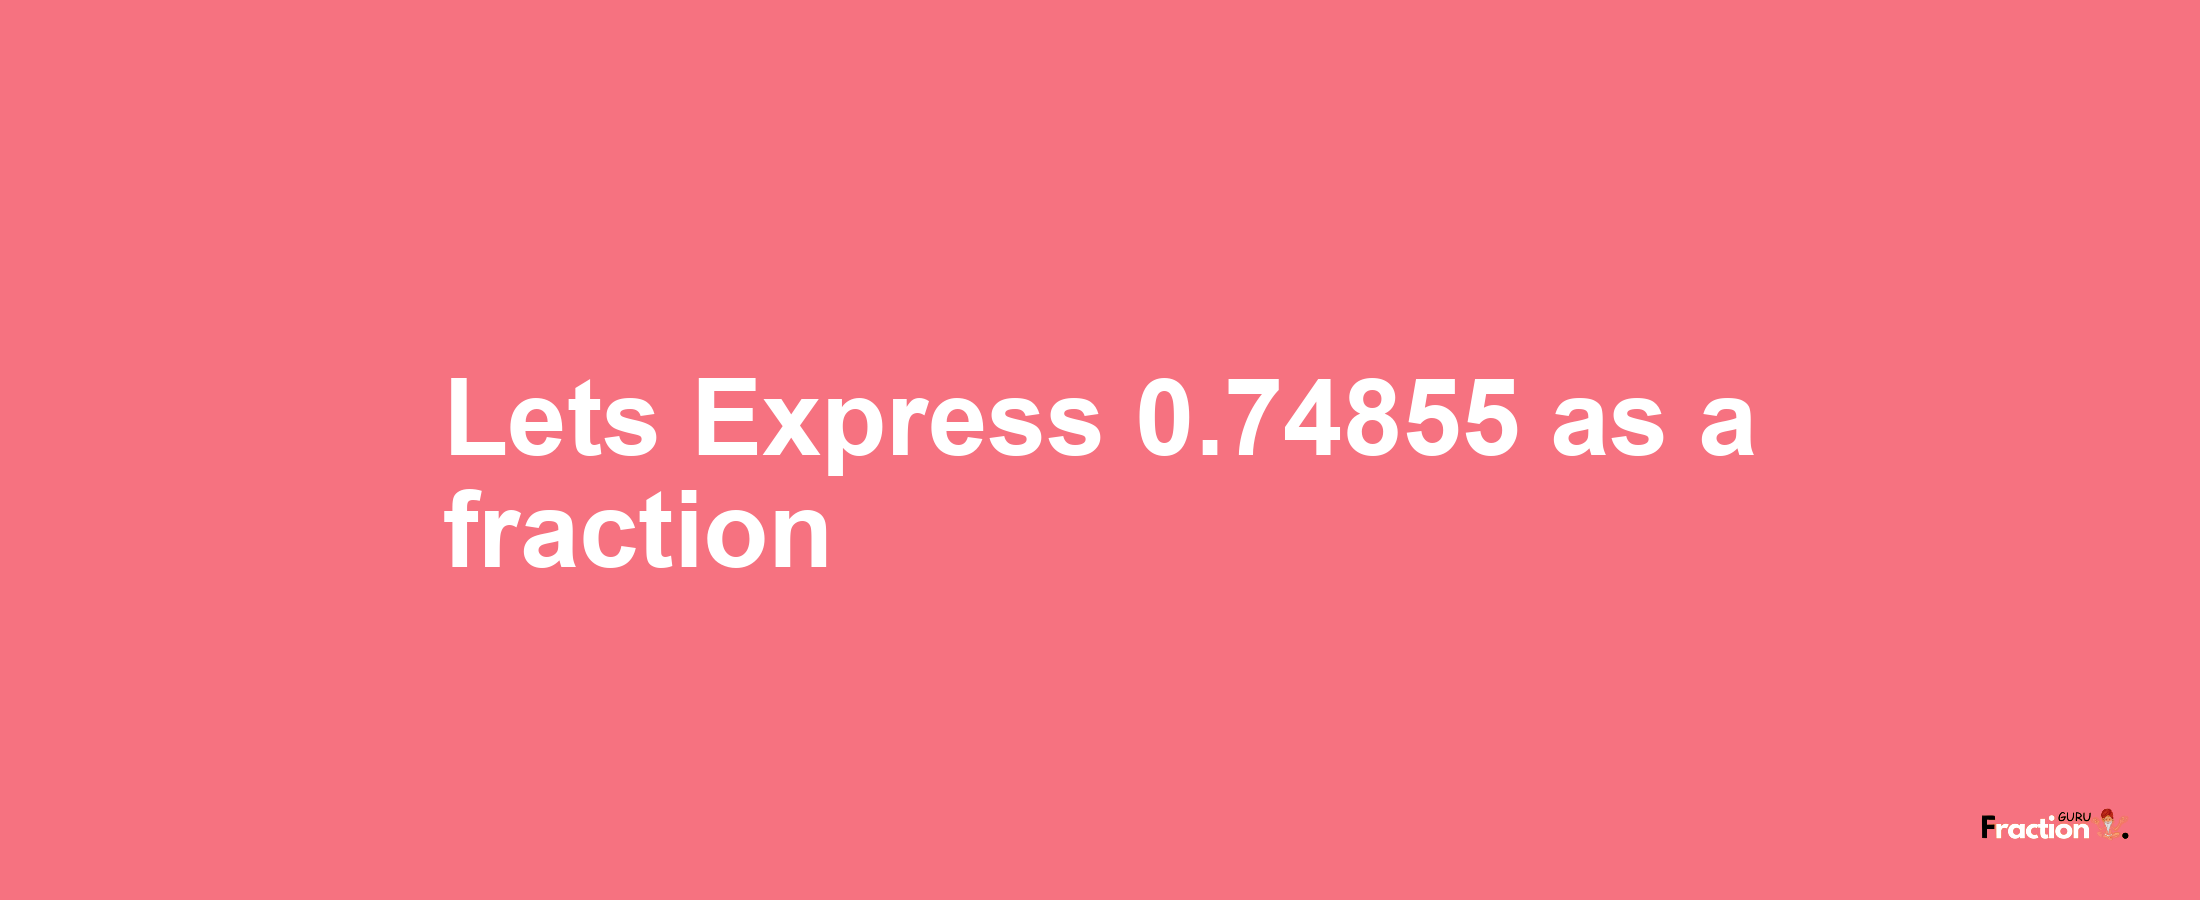 Lets Express 0.74855 as afraction